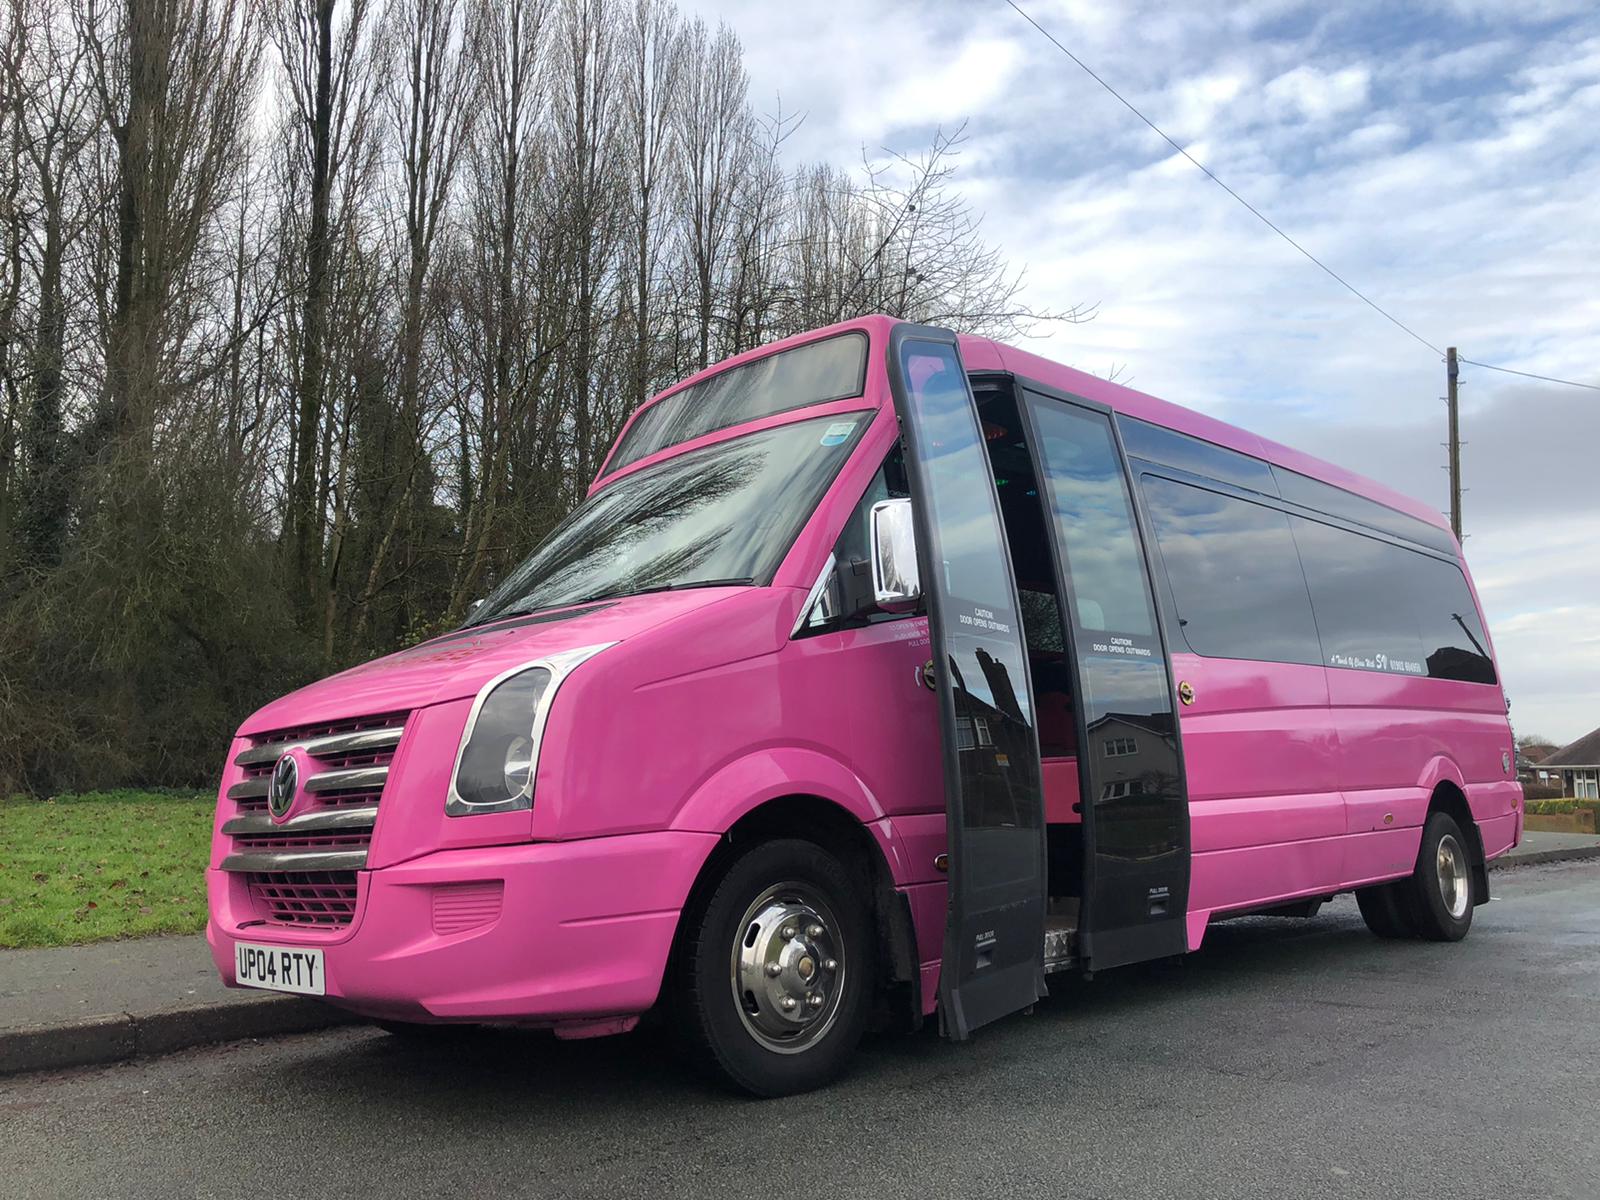 Hen Party Transport Hire: Why Party Buses are the Perfect Ride for Unforgettable Hen Parties?